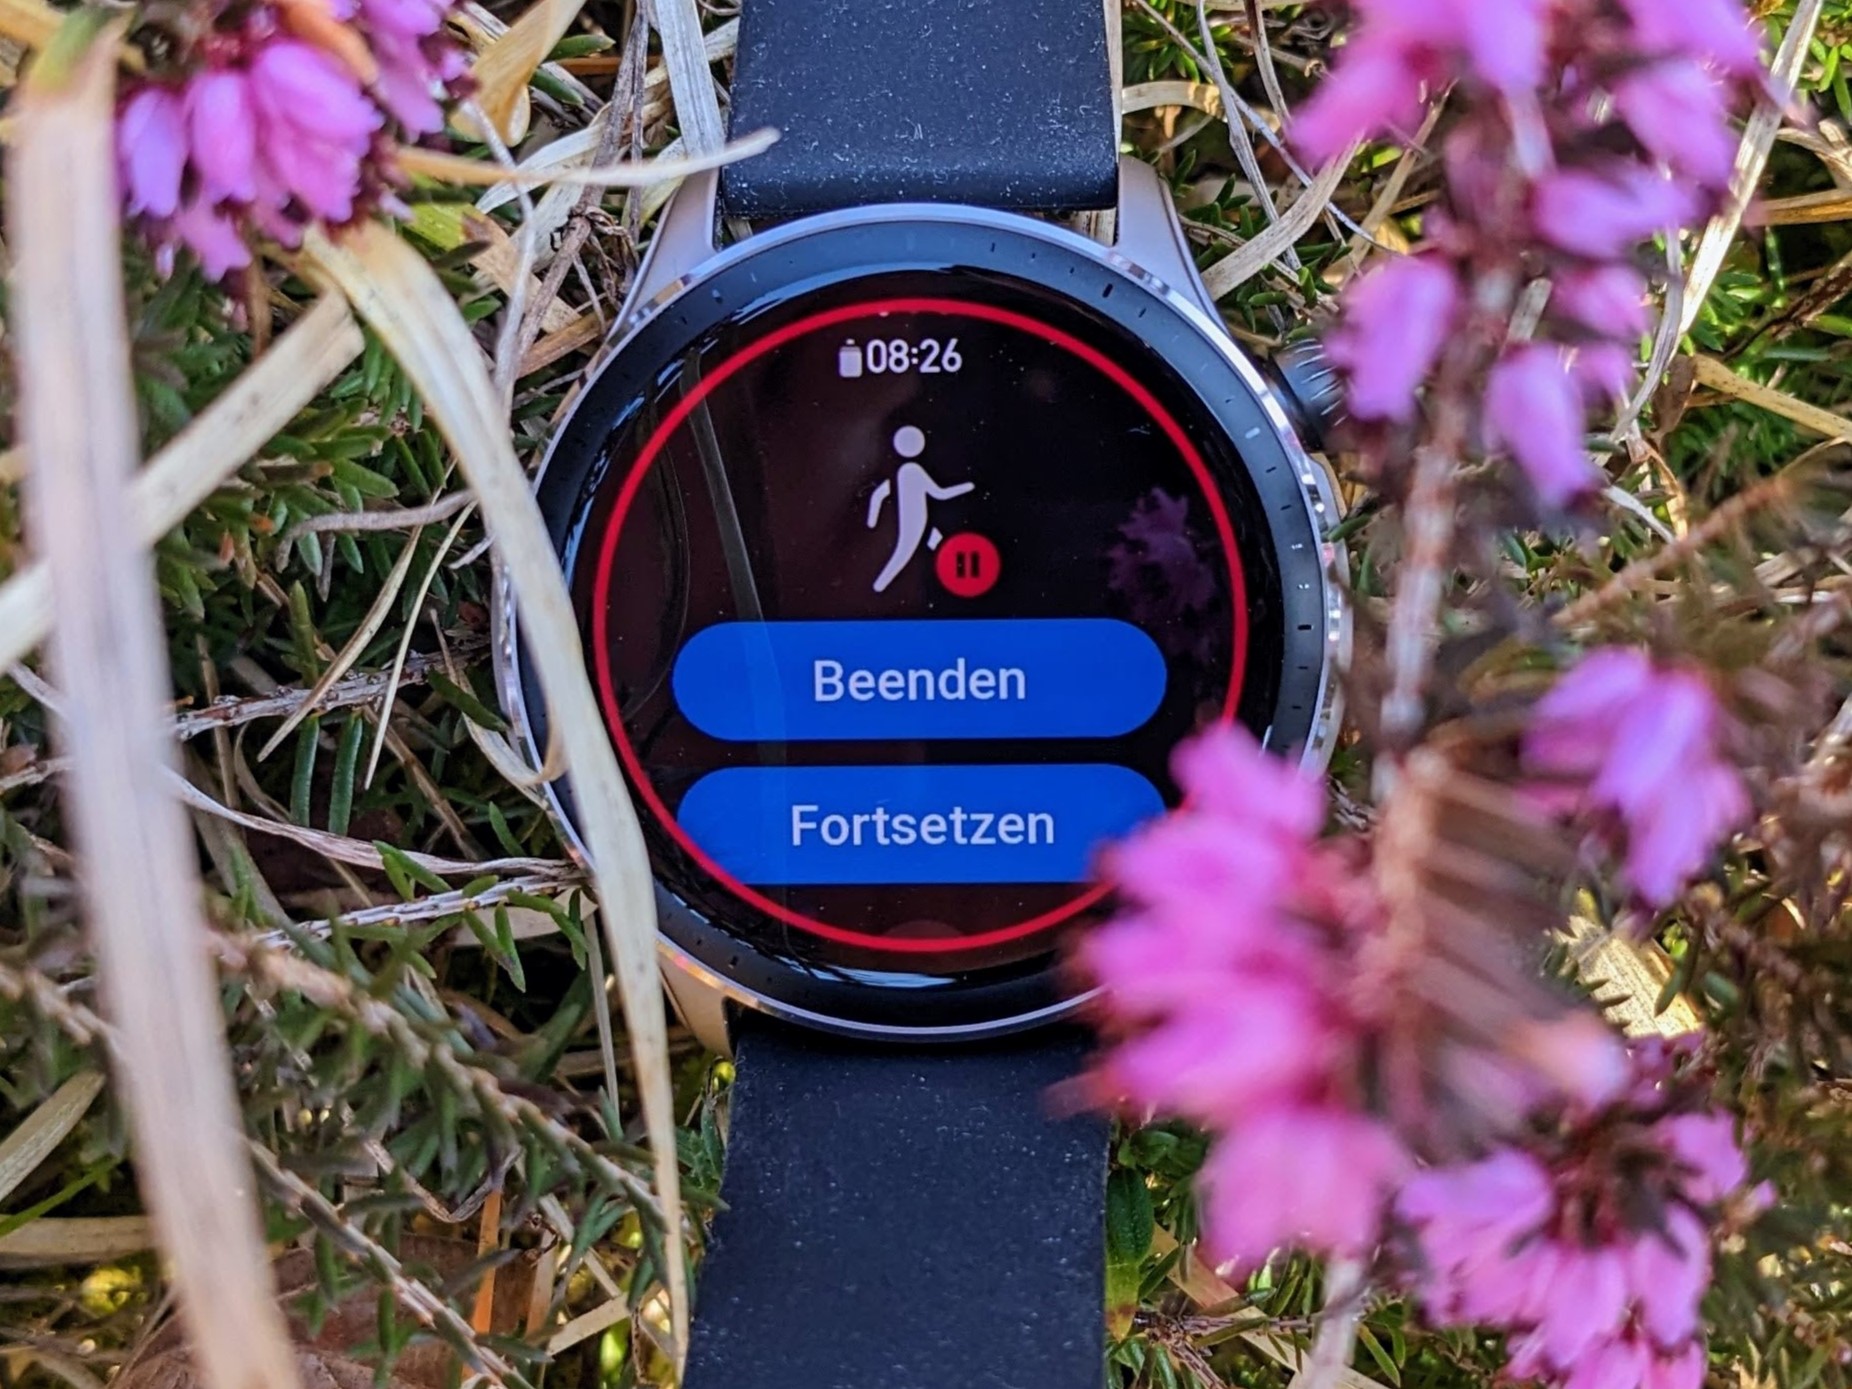 AMAZFIT GTR 4: Enhanced Features, Alexa, and Call Functionality